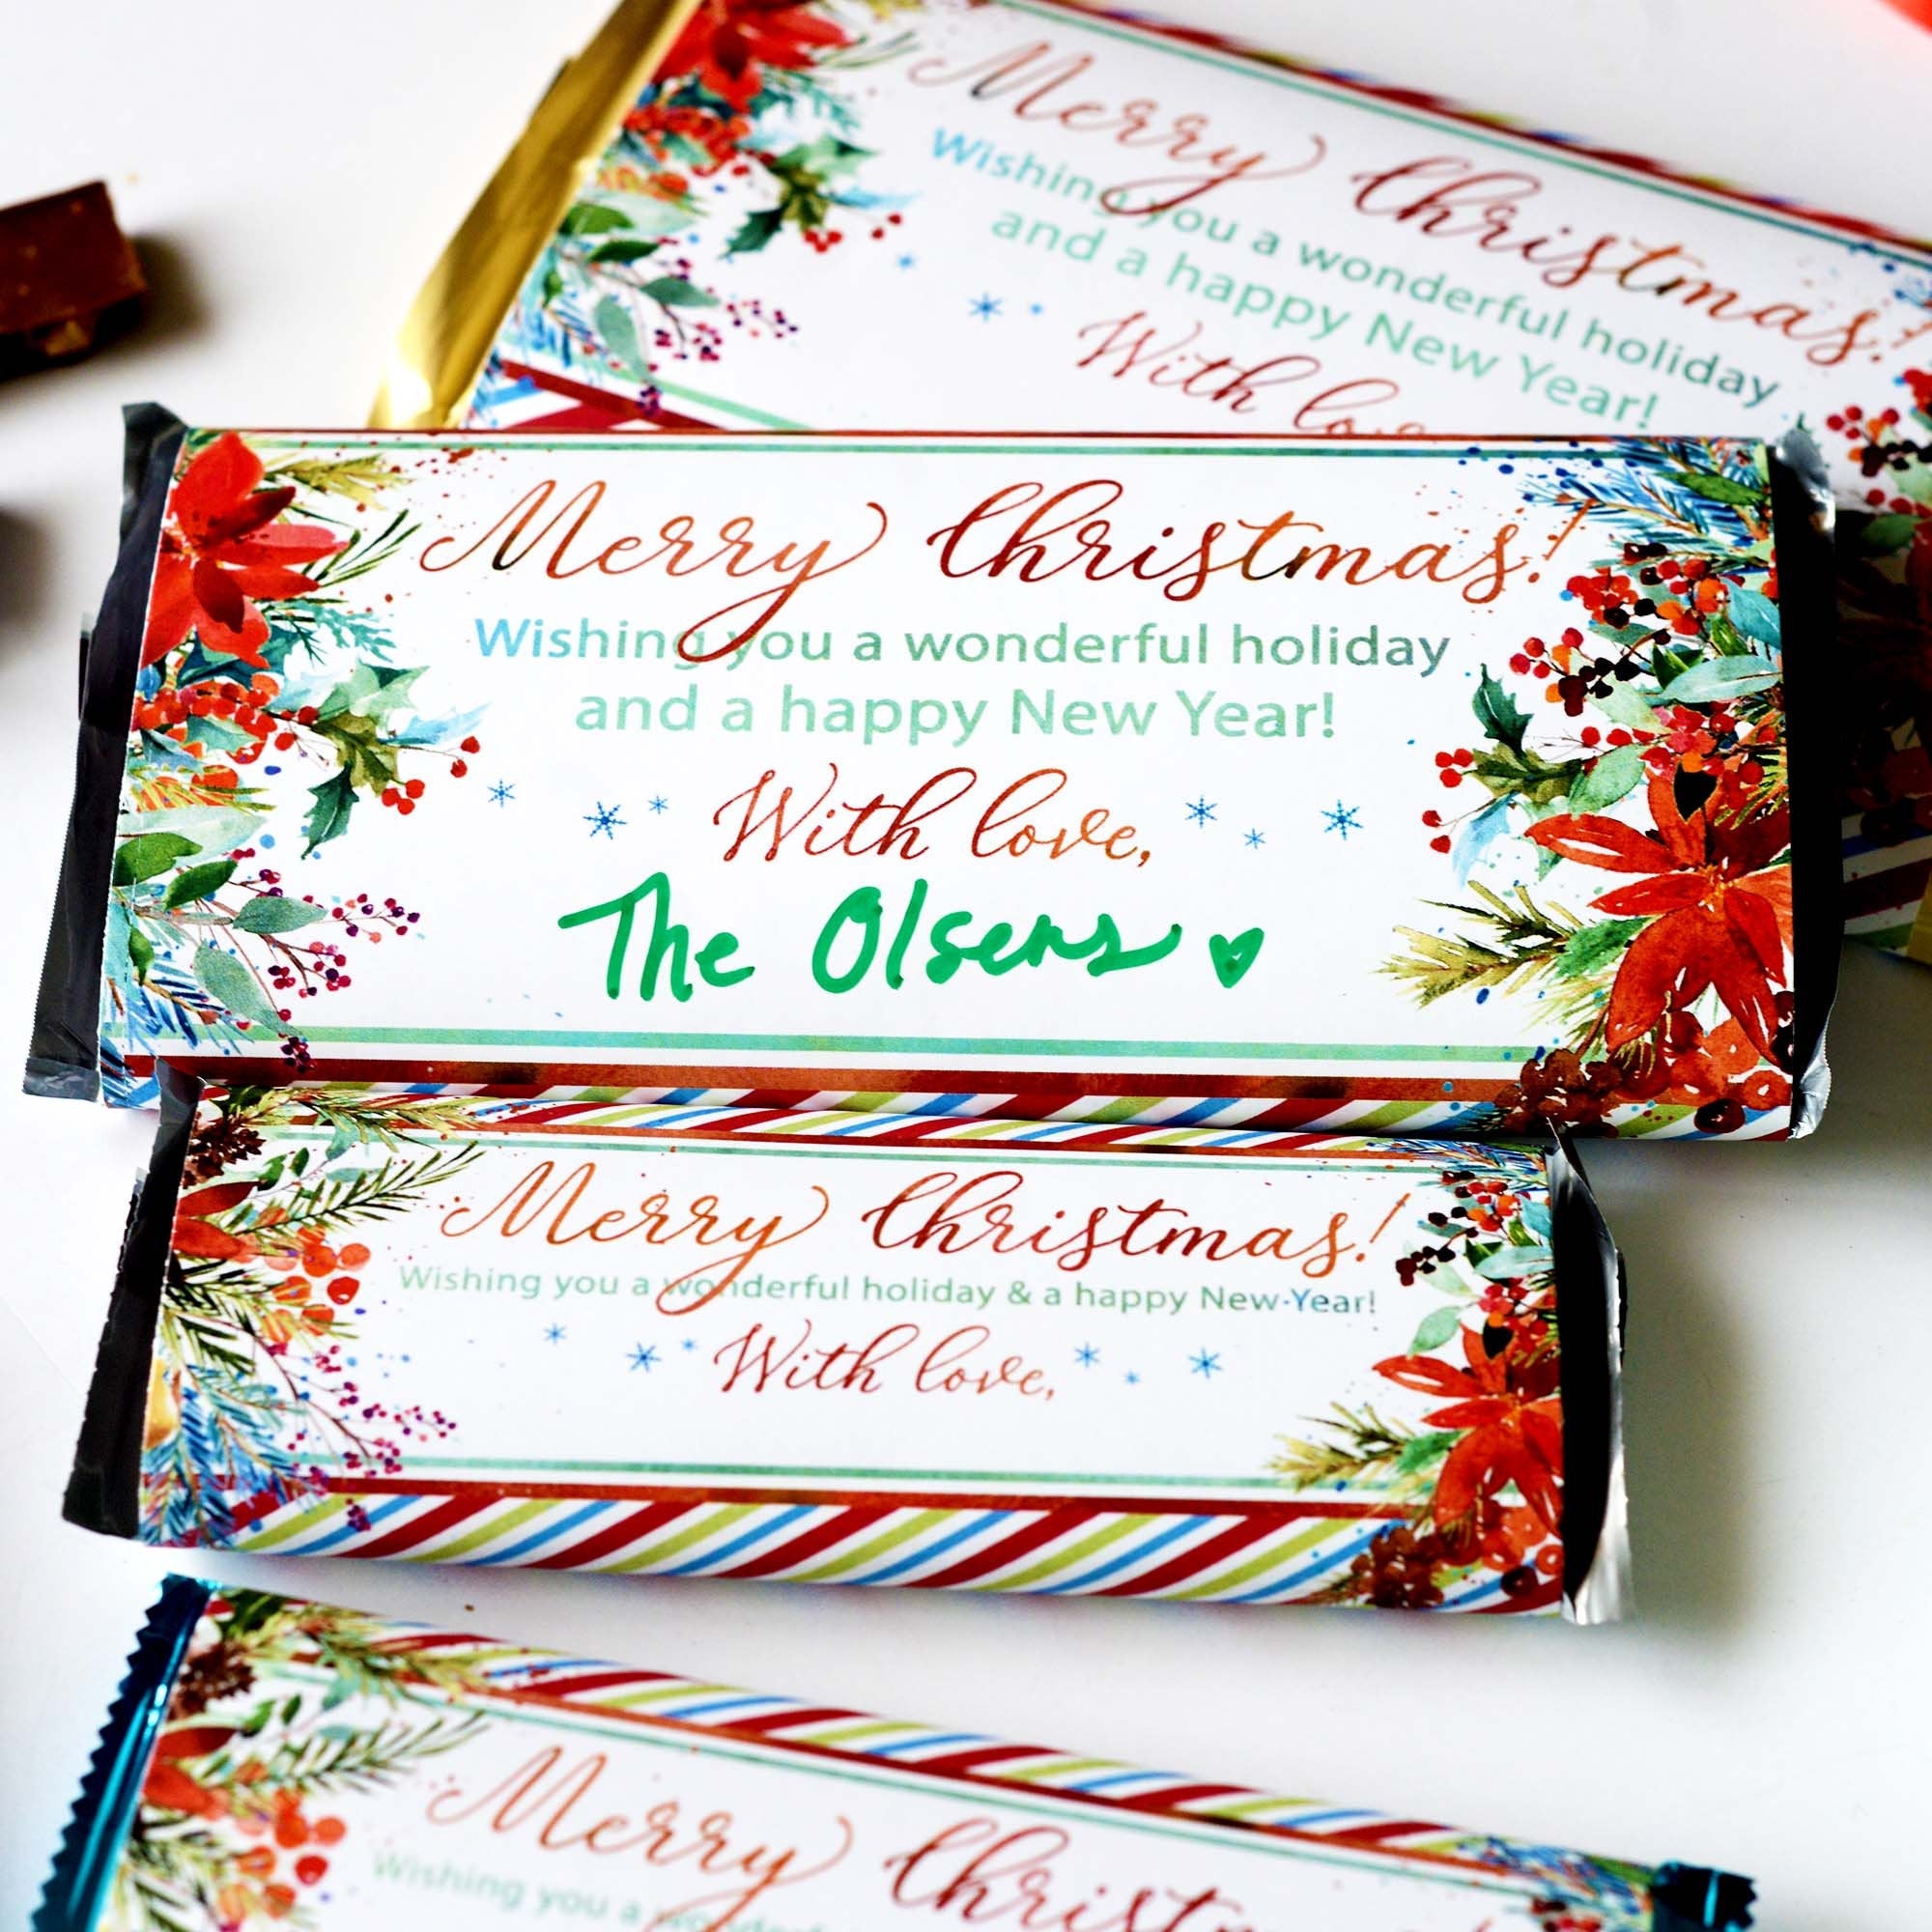 Christmas Chocolate Candy Bar Wrapper - Ministering Printables